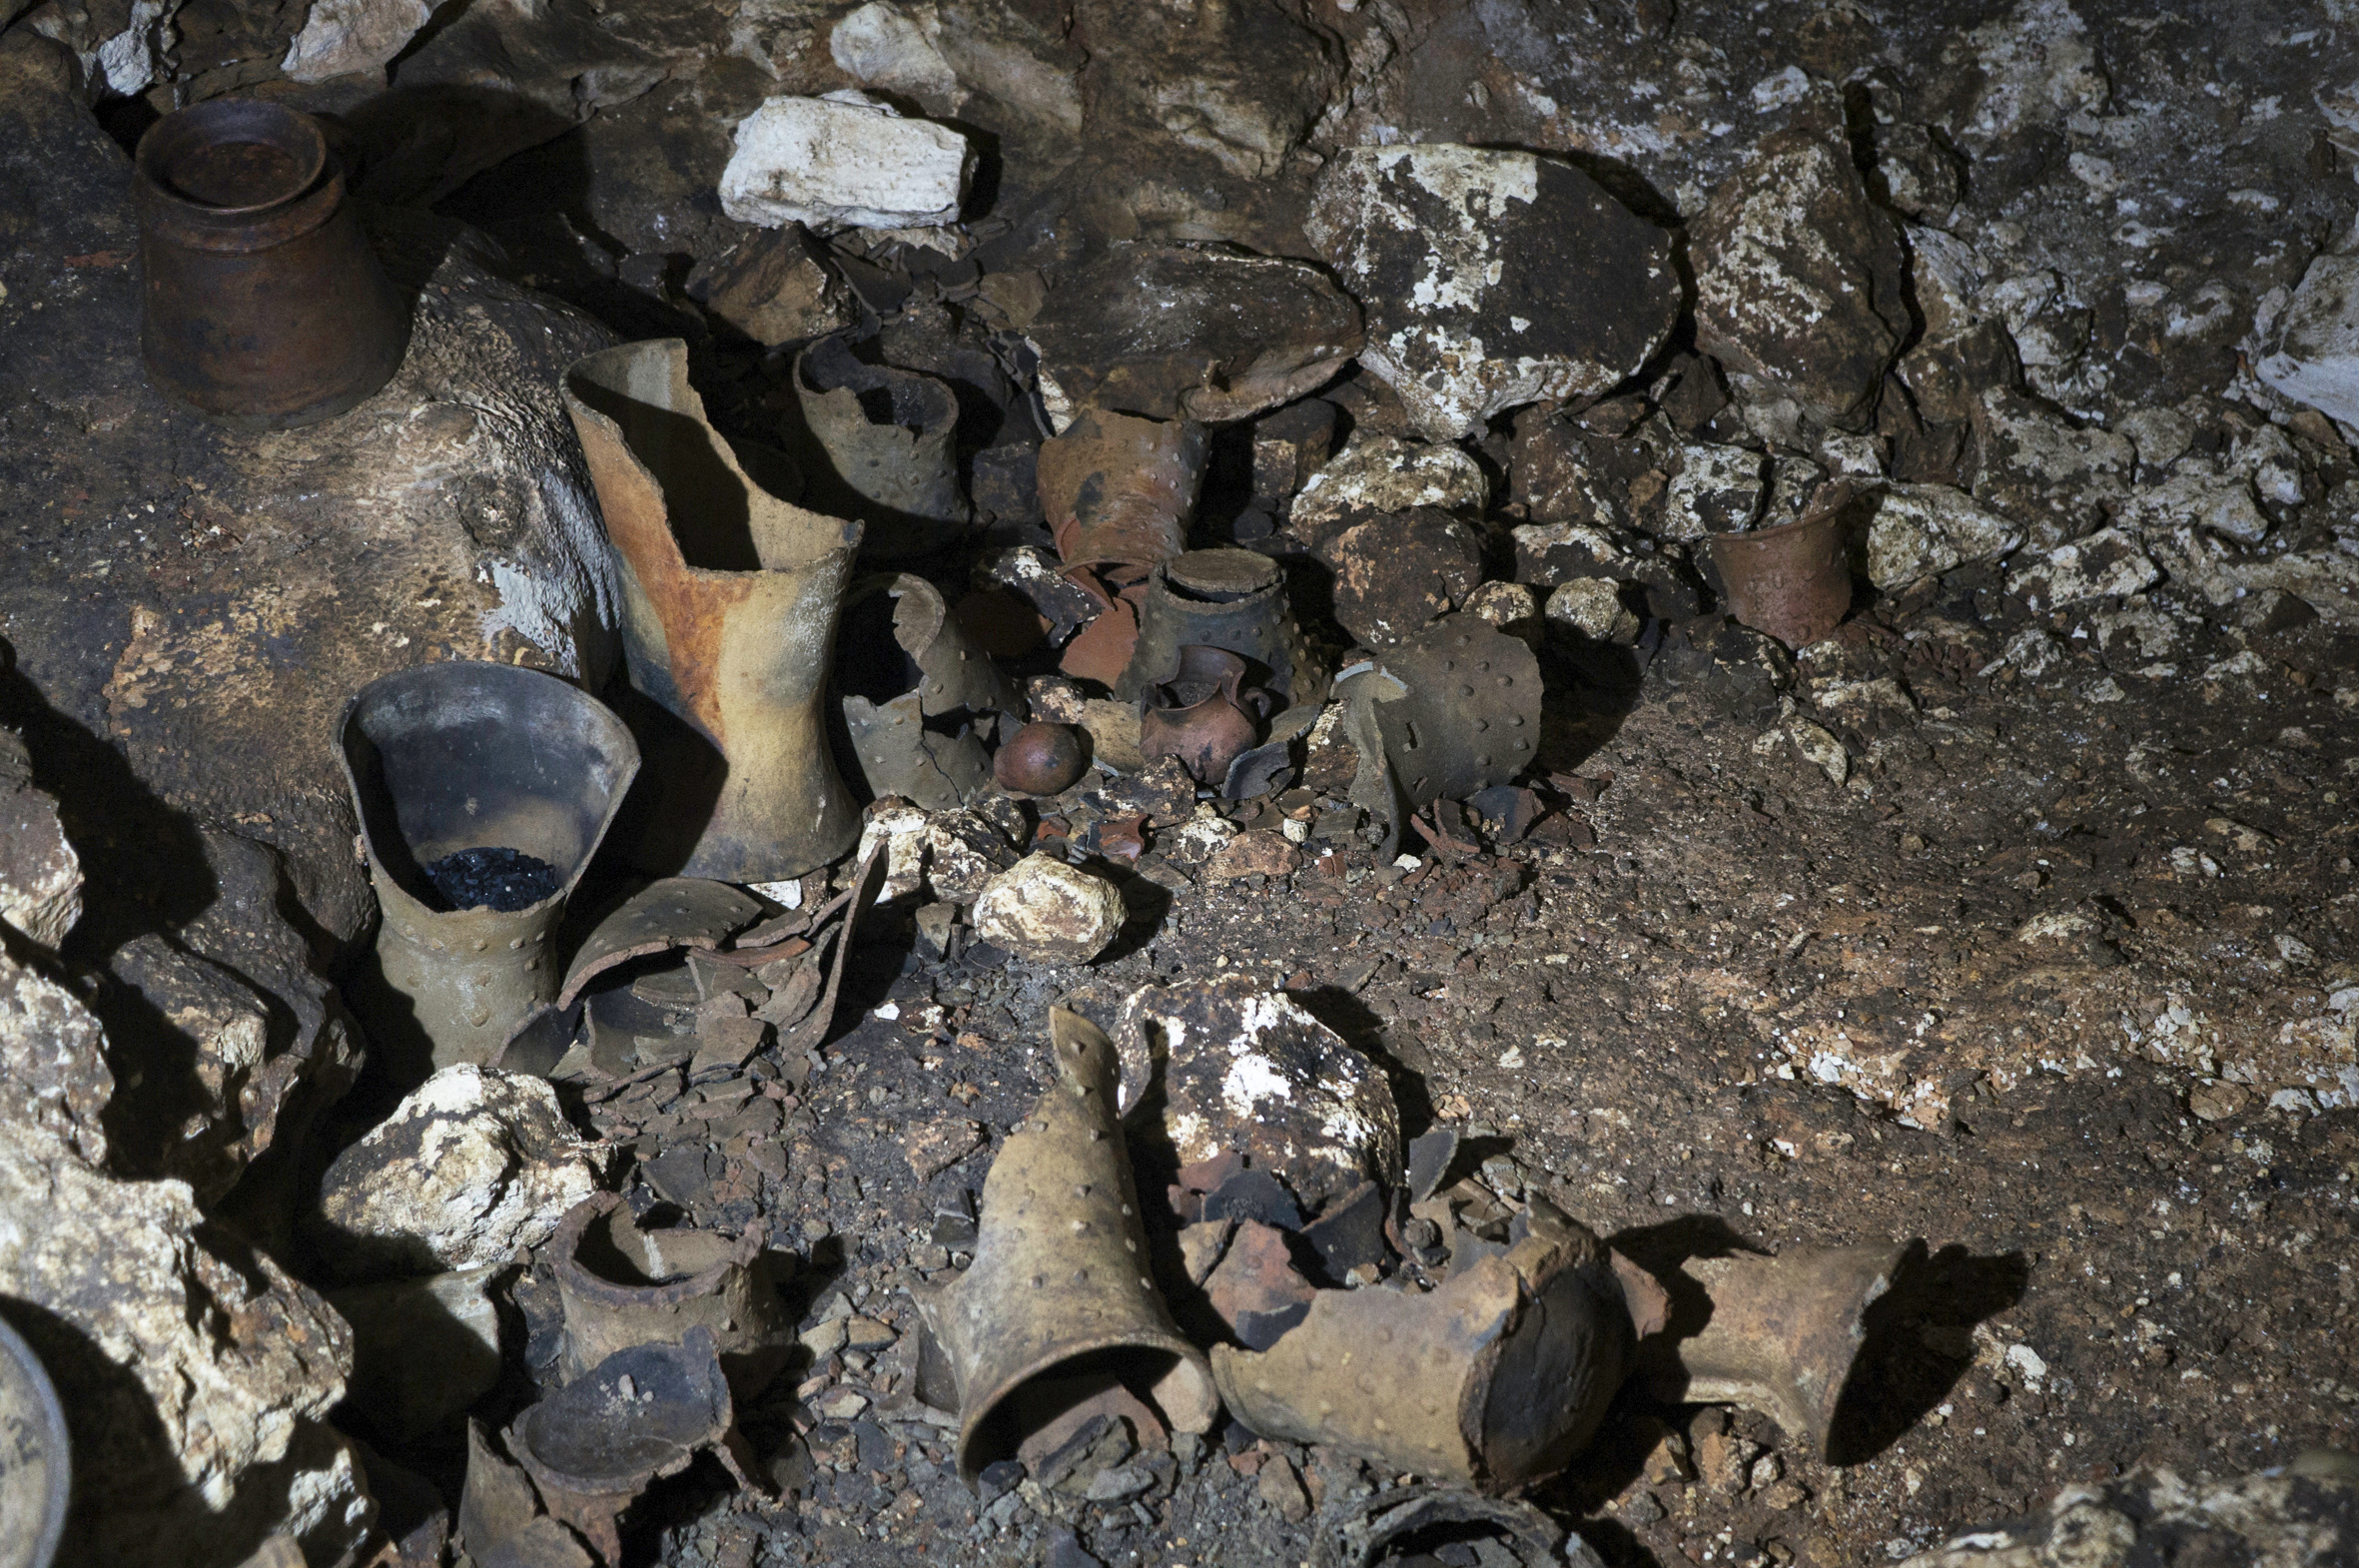 Mexican experts find cave, offerings at Chichen Itza